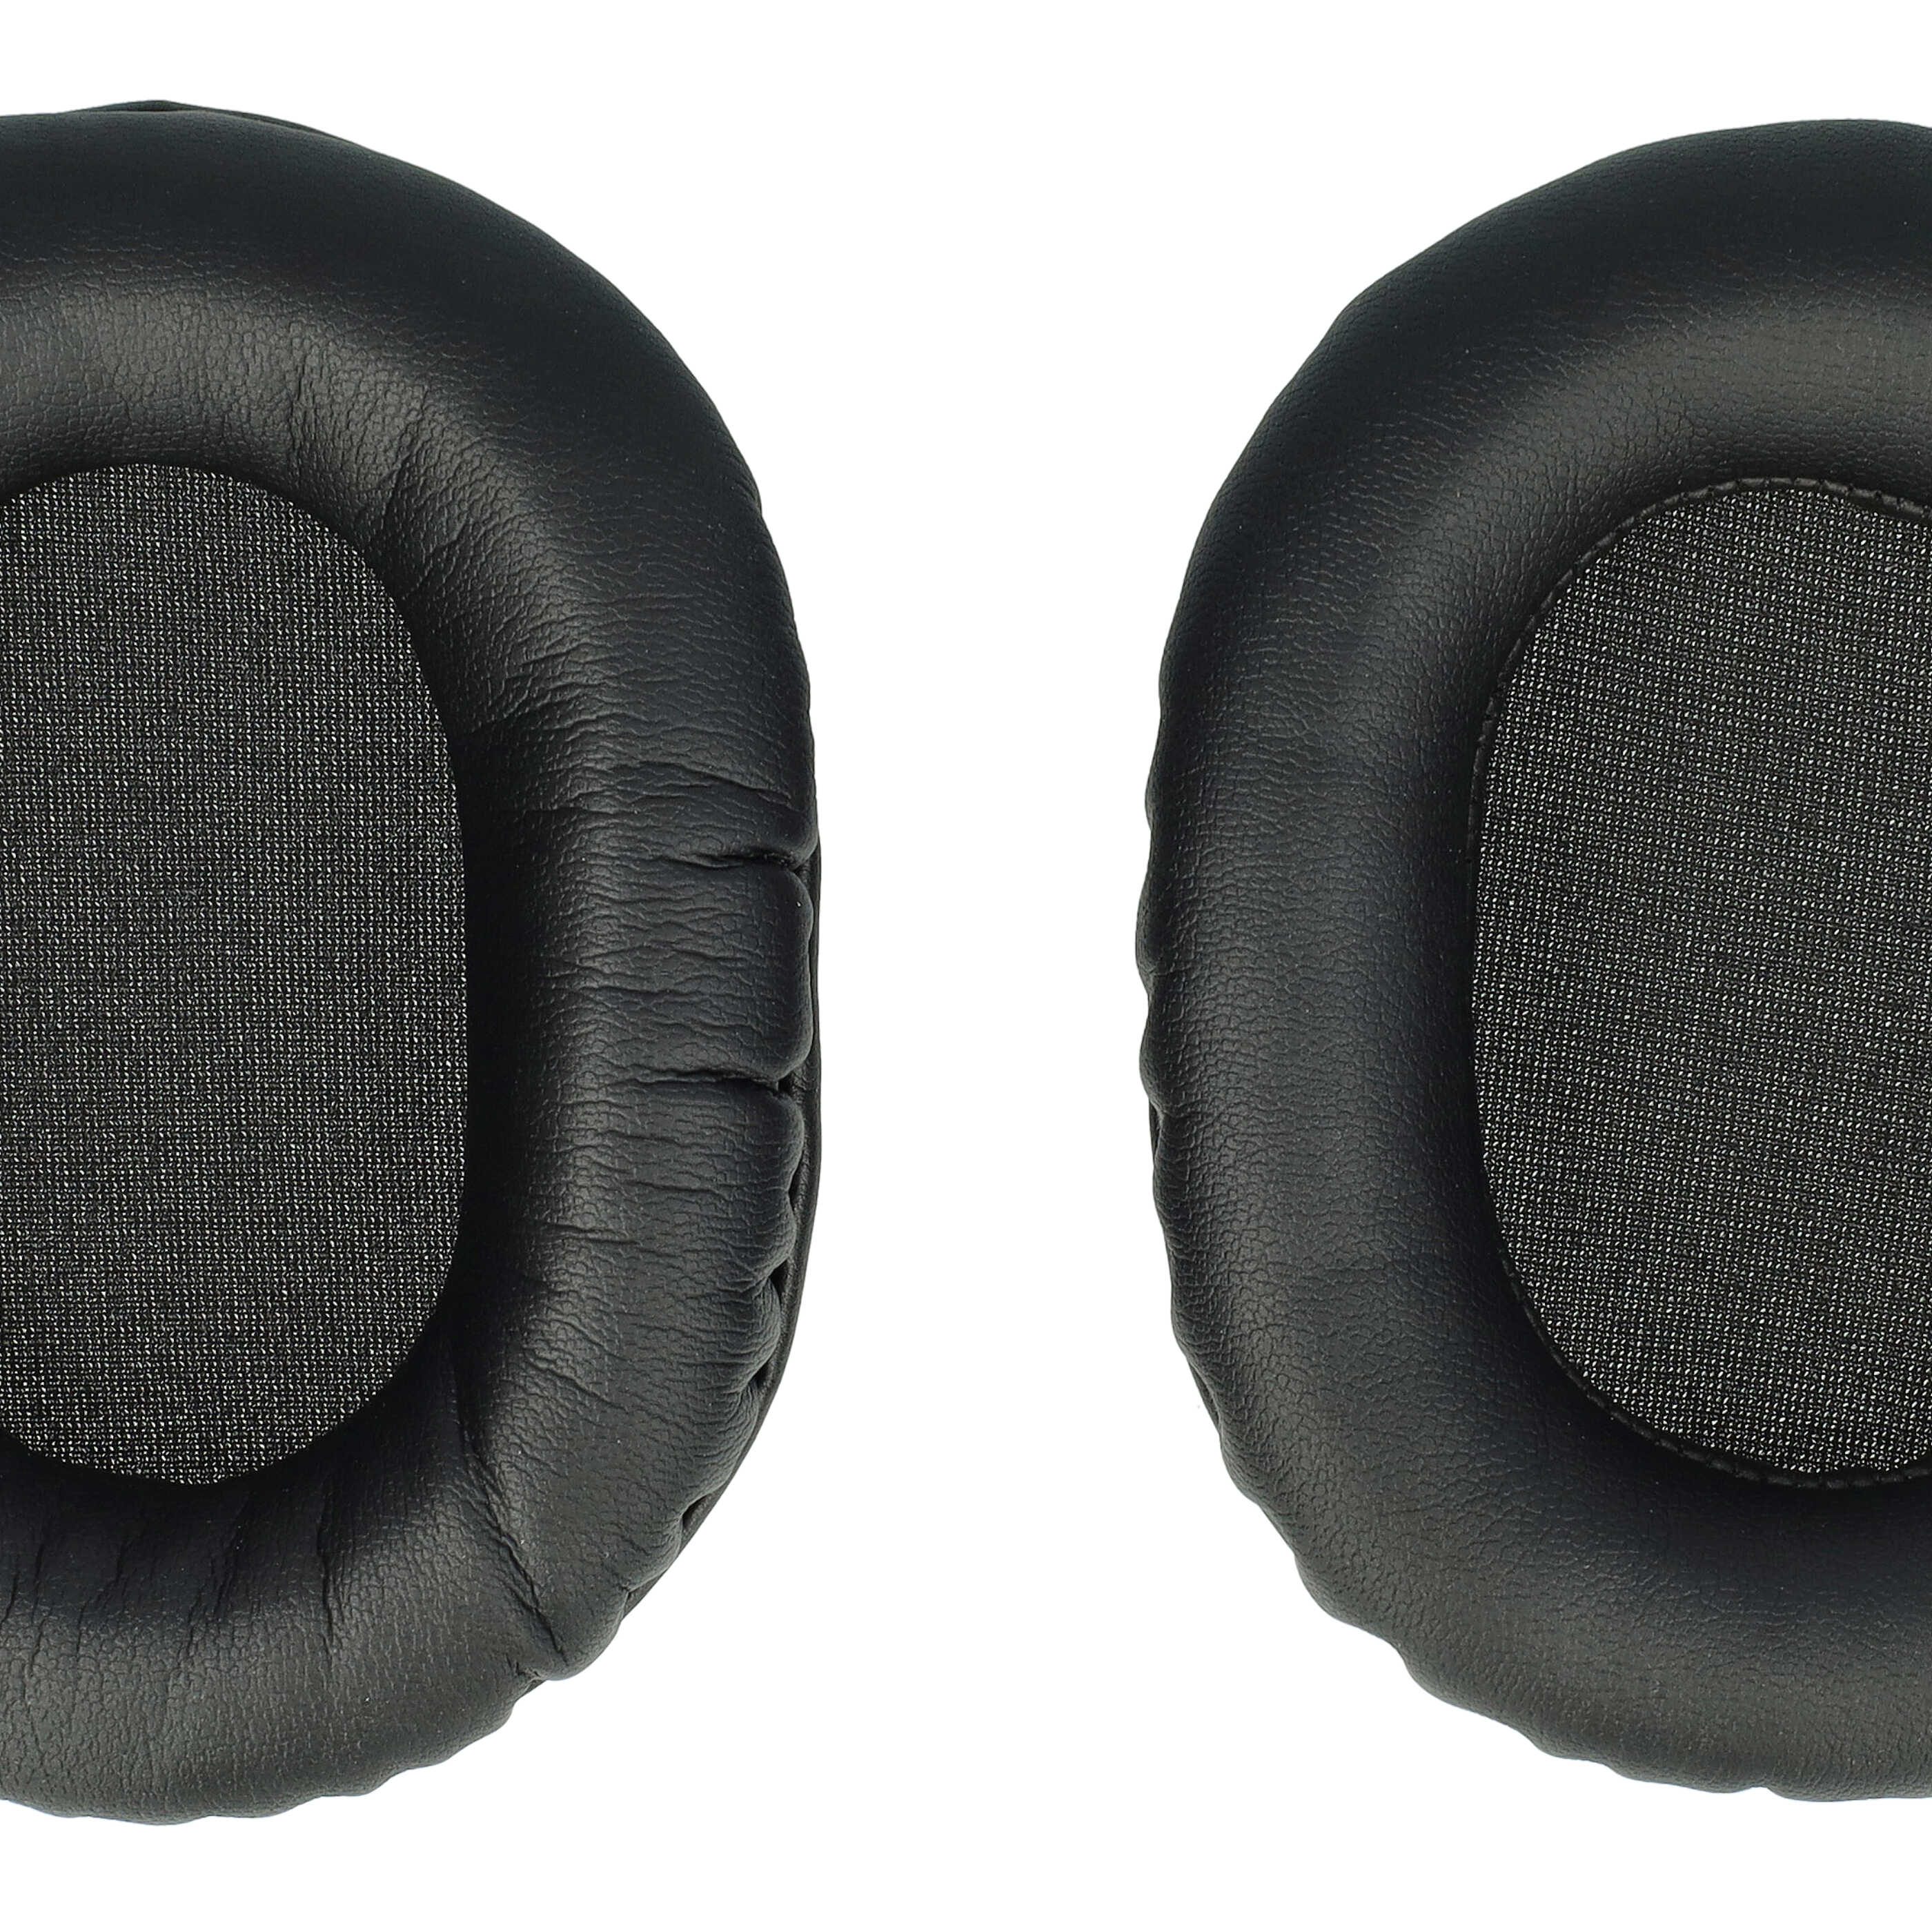 2x Ear Pads suitable for Teufel MASSIVE Headphones etc. - foam / synthetic leather, 2 mm thick